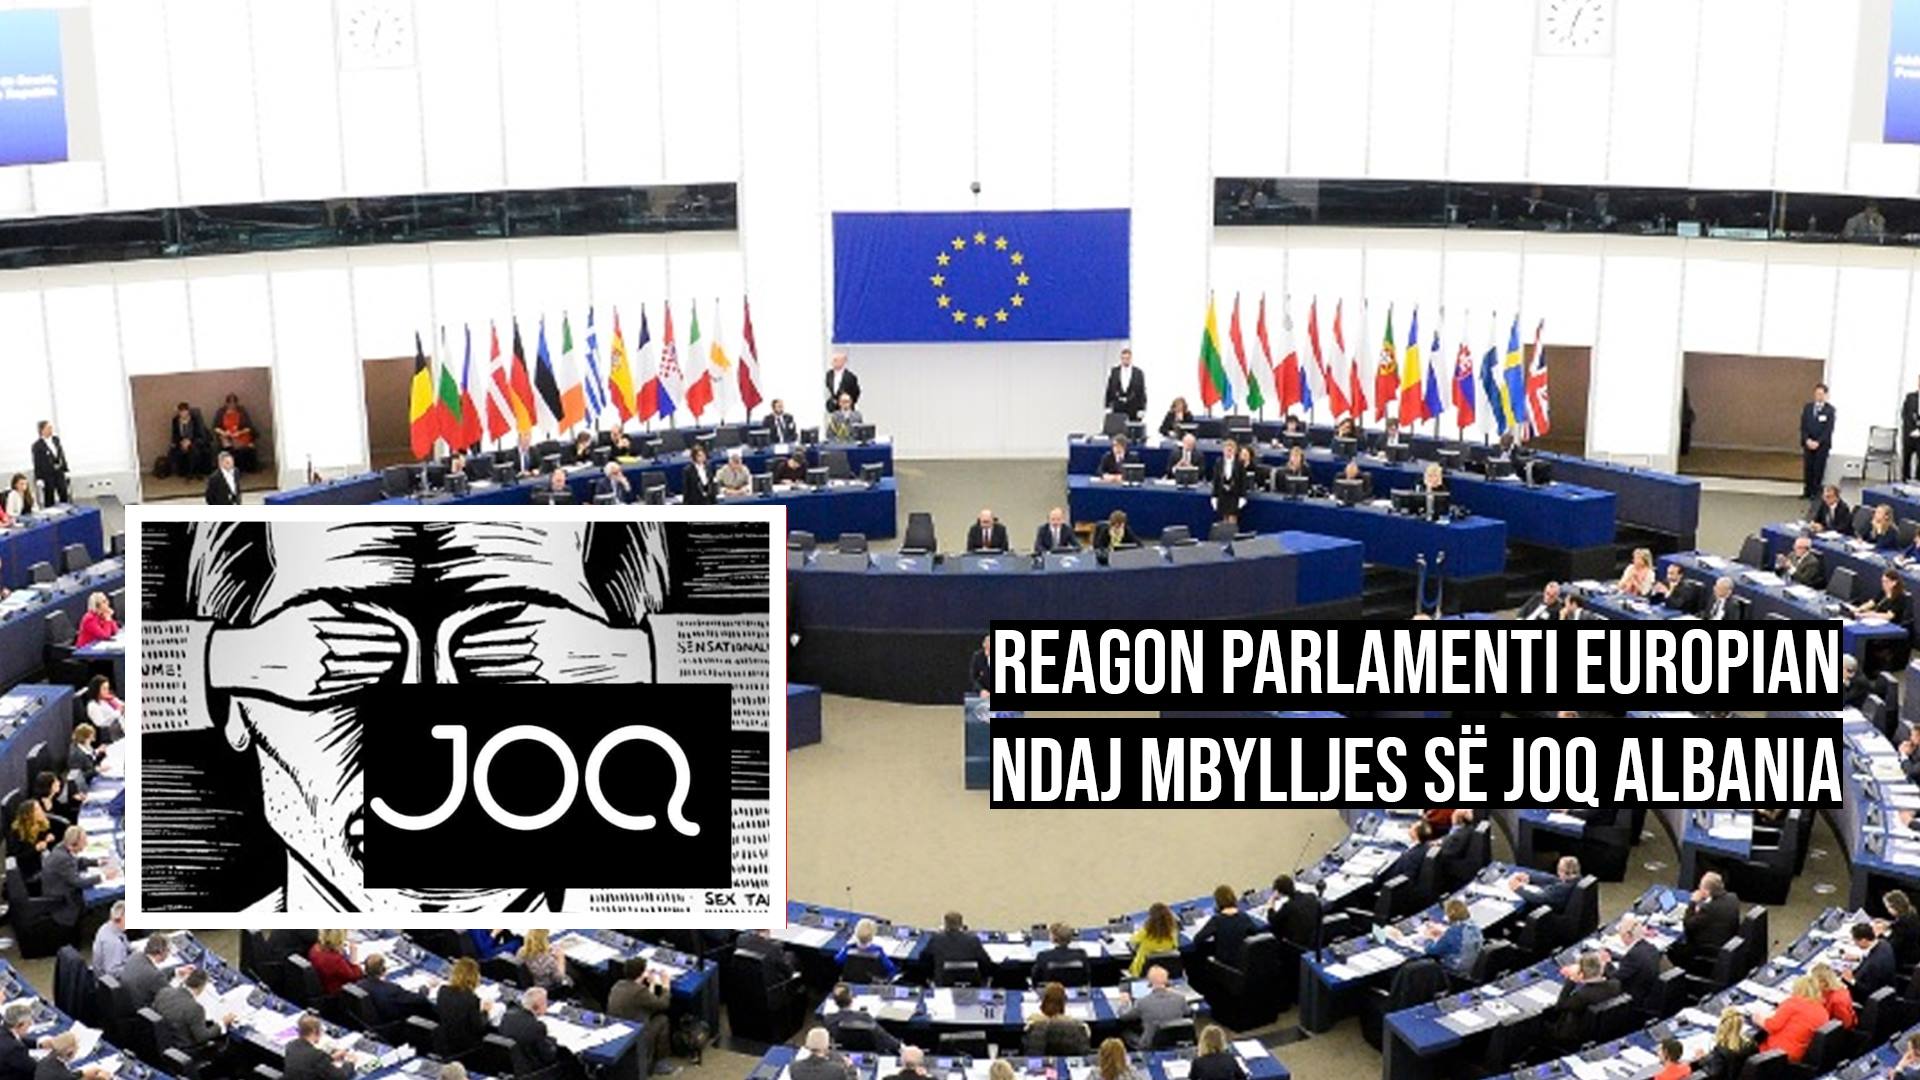 European Parliament: JOQ ALBANIA, a media with a reputation for independent, quality and investigative news